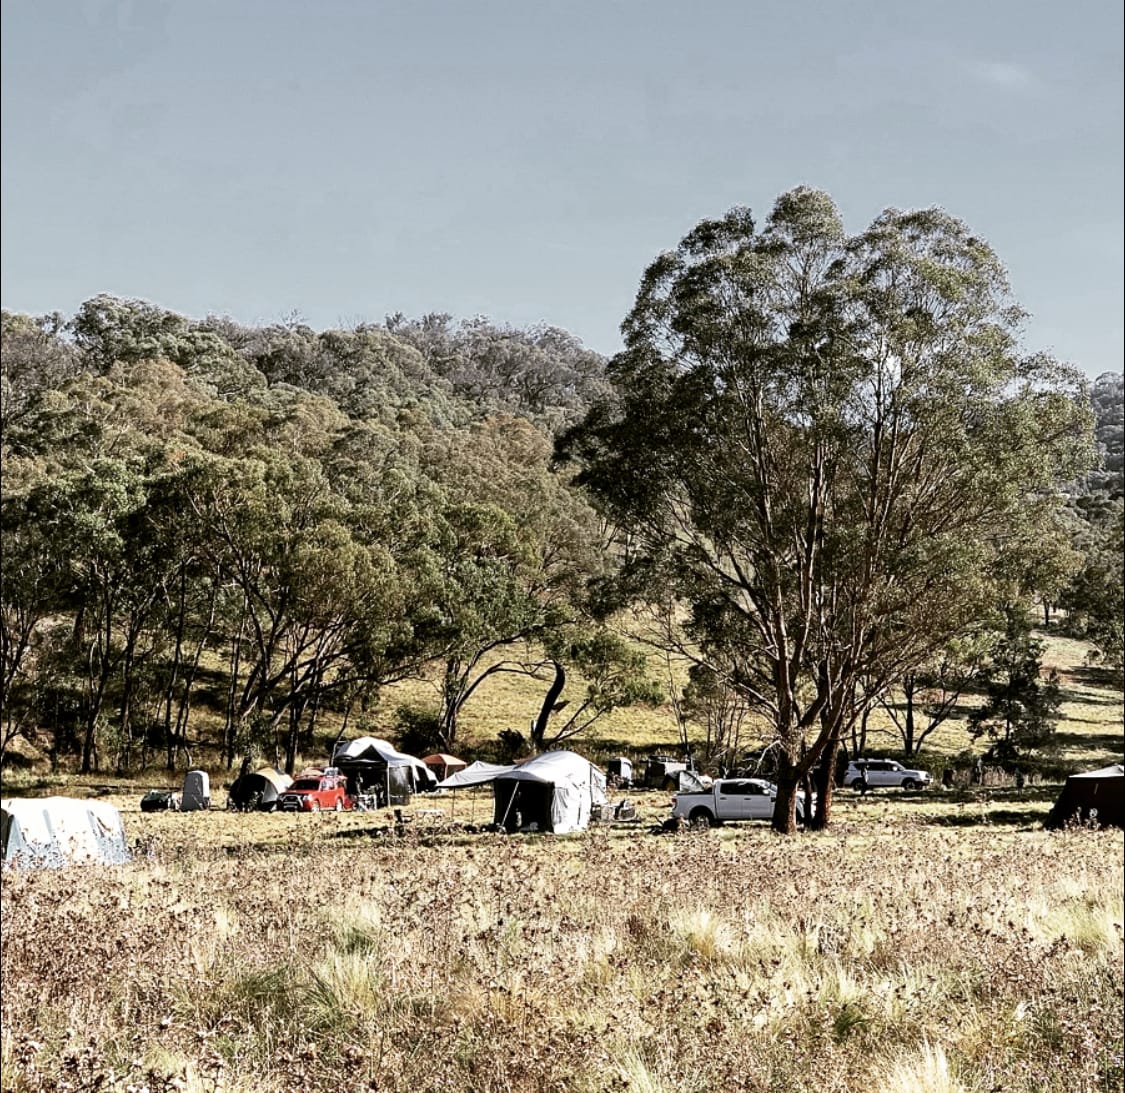 Paddock Camping - 4WD only